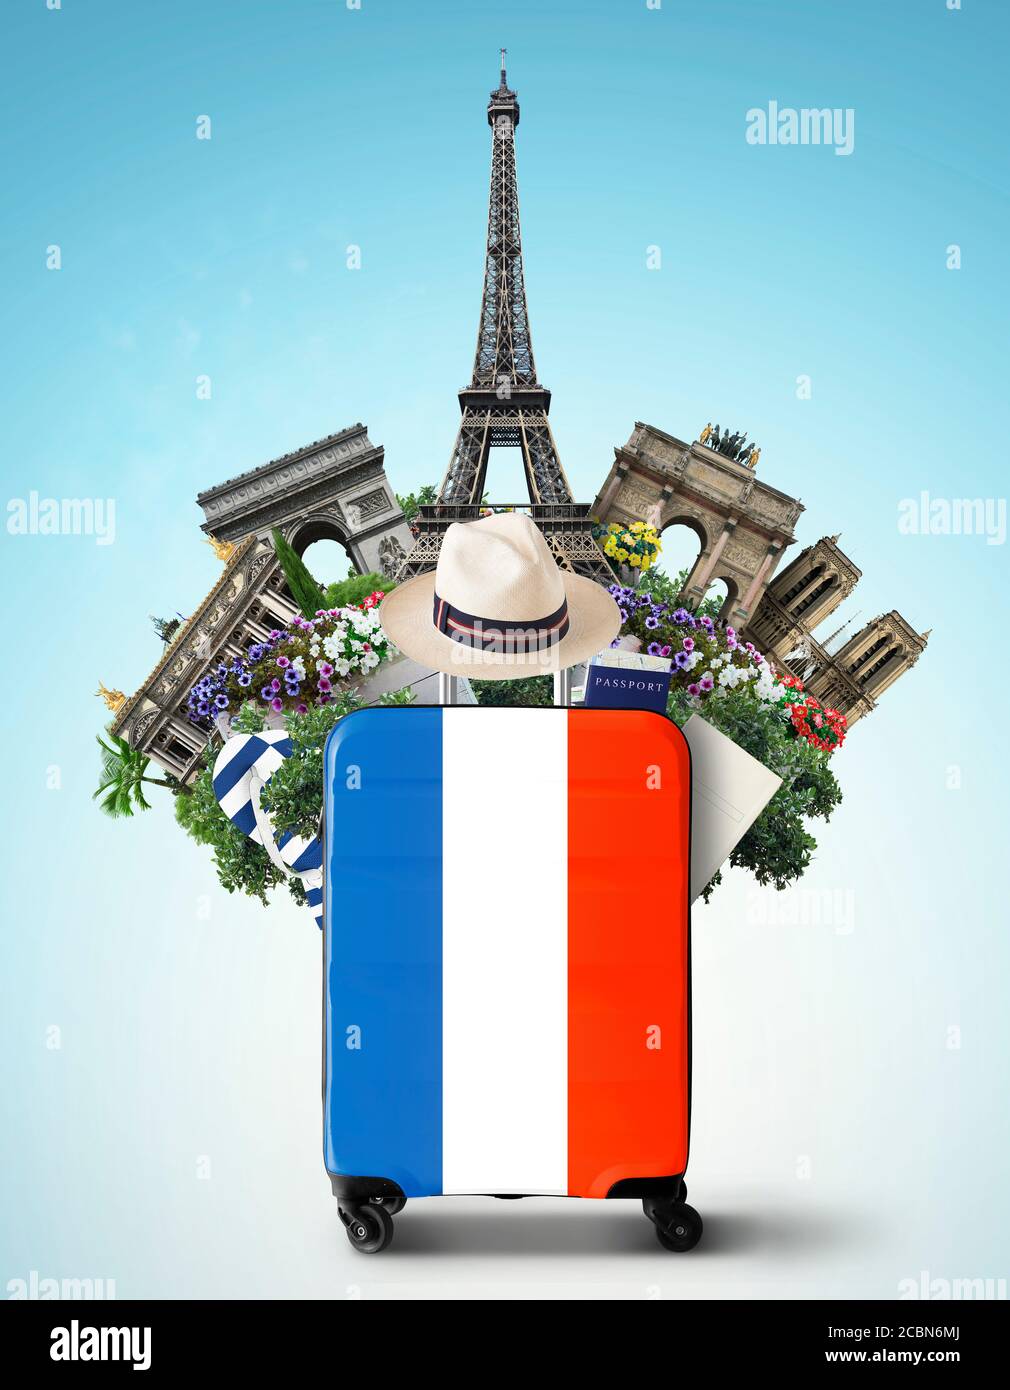 France, modern suitcase with French flag and landmarks Stock Photo